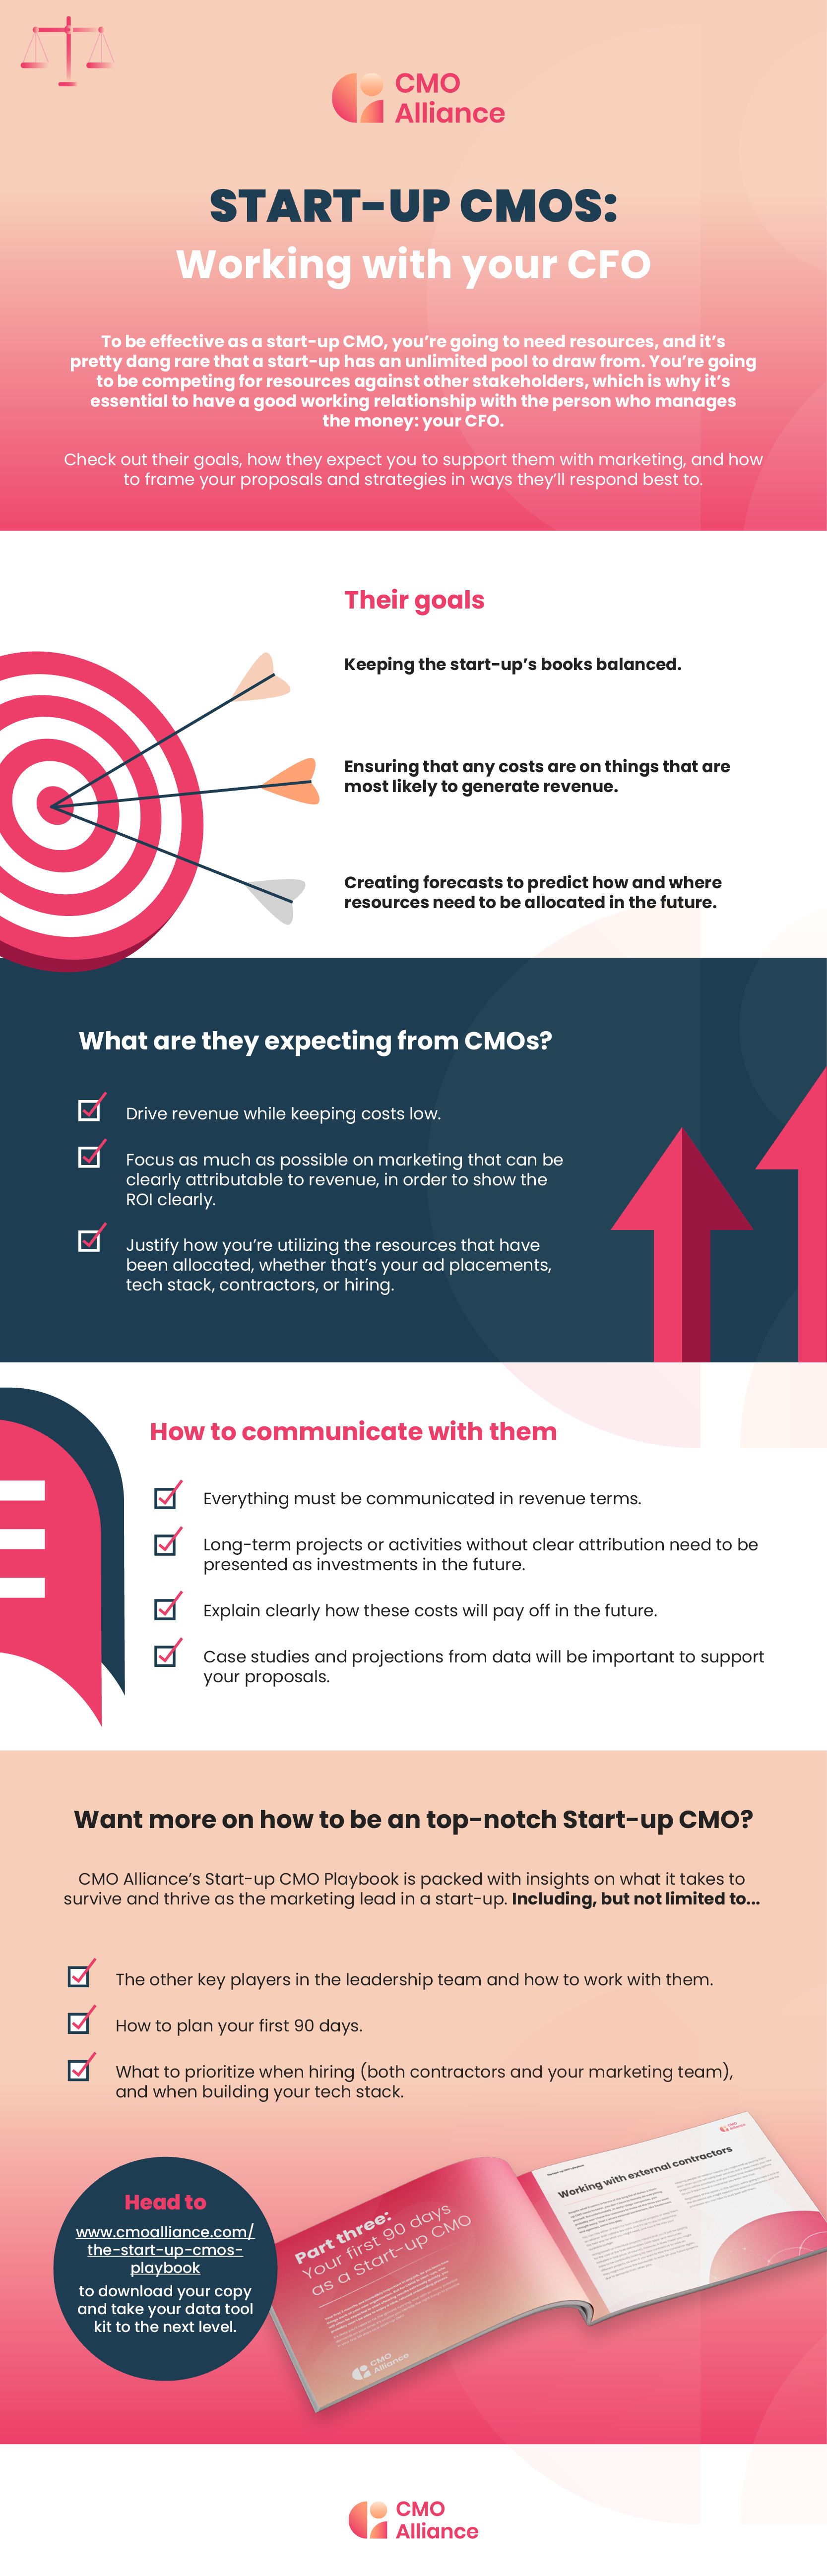 Infographic showing how Start-up CMOs should work with CFOs.